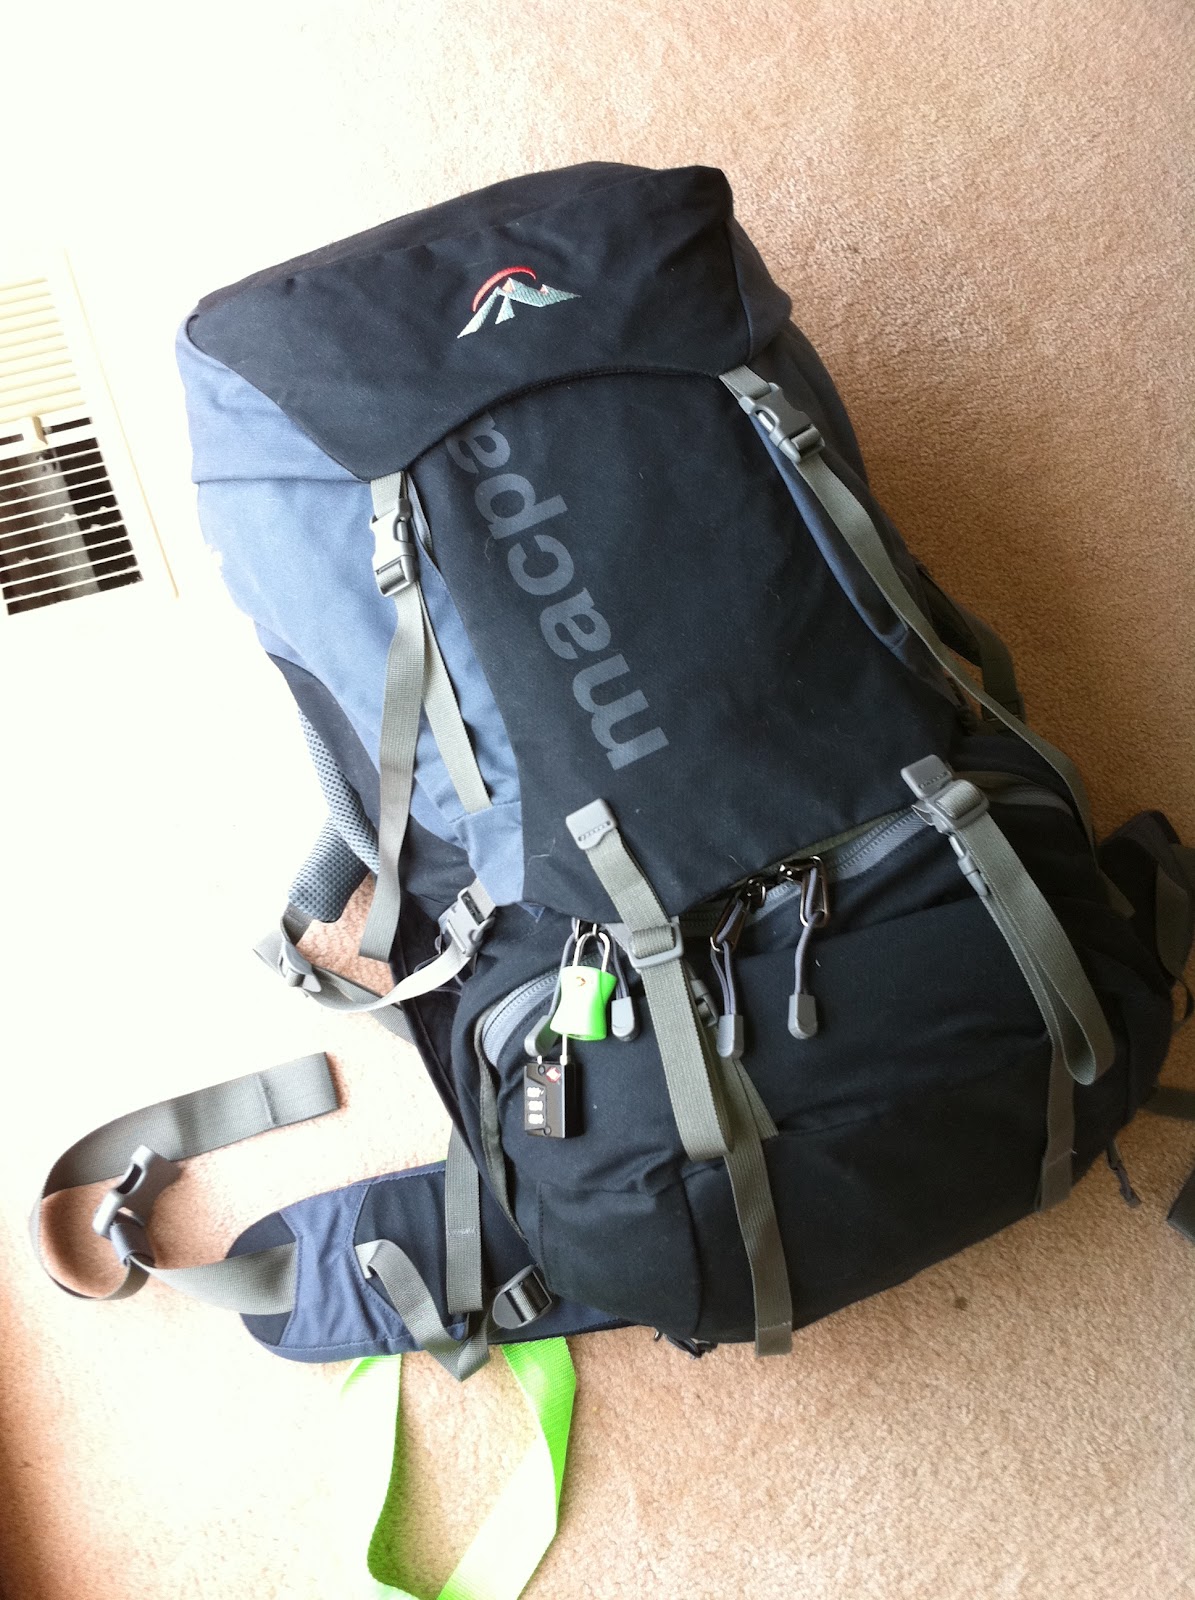 theGYSE: What to look for when buying a decent travel pack..